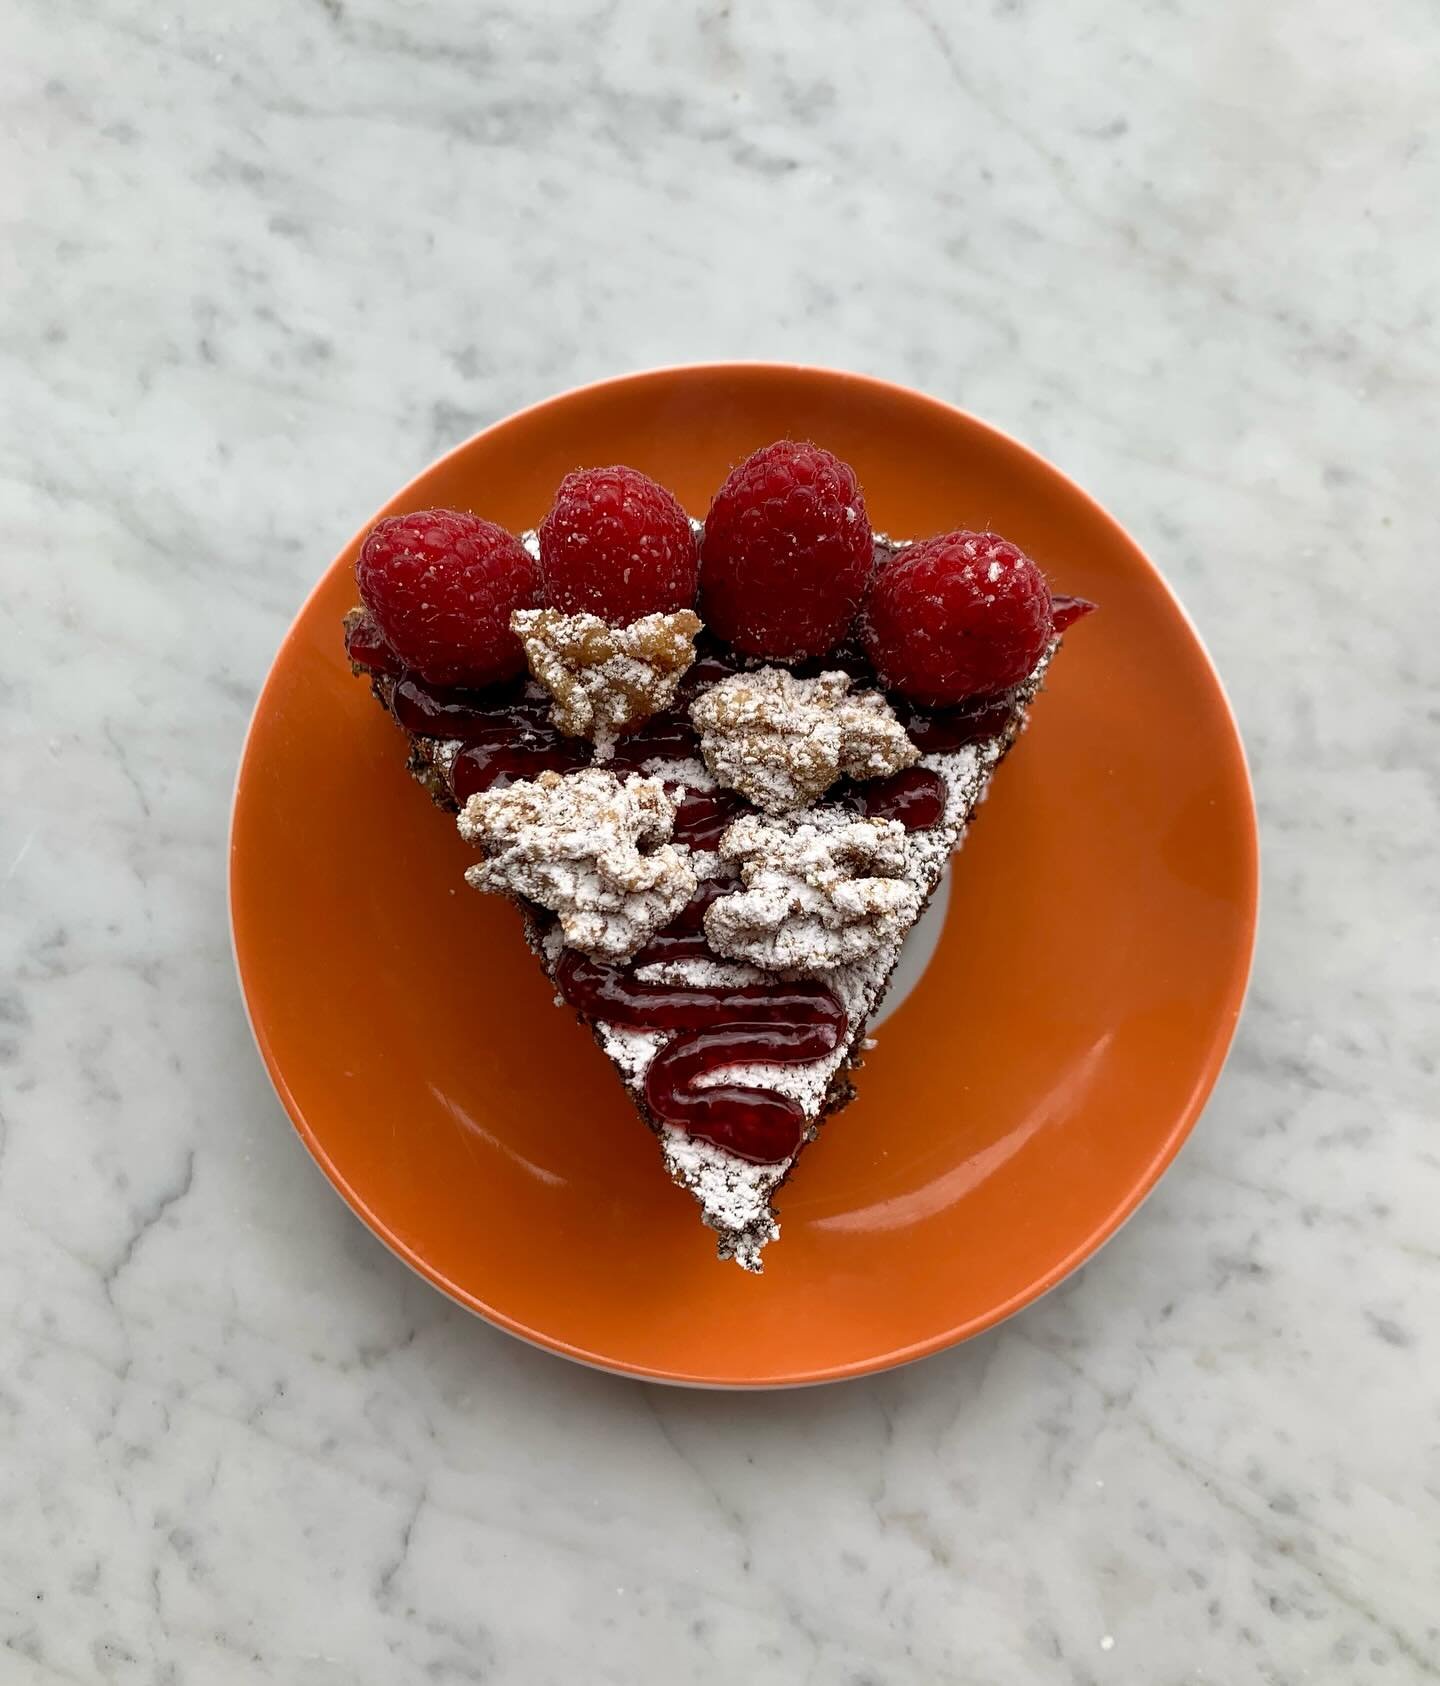 A new feature on our Passover menu is this Poppy Walnut Raspberry Cake! 

Made of ground poppy seeds and walnuts, it is gluten free and perfectly semi-sweet! This Makos Dios cake pays homage to classic Hungarian flavors and includes raspberry preserv